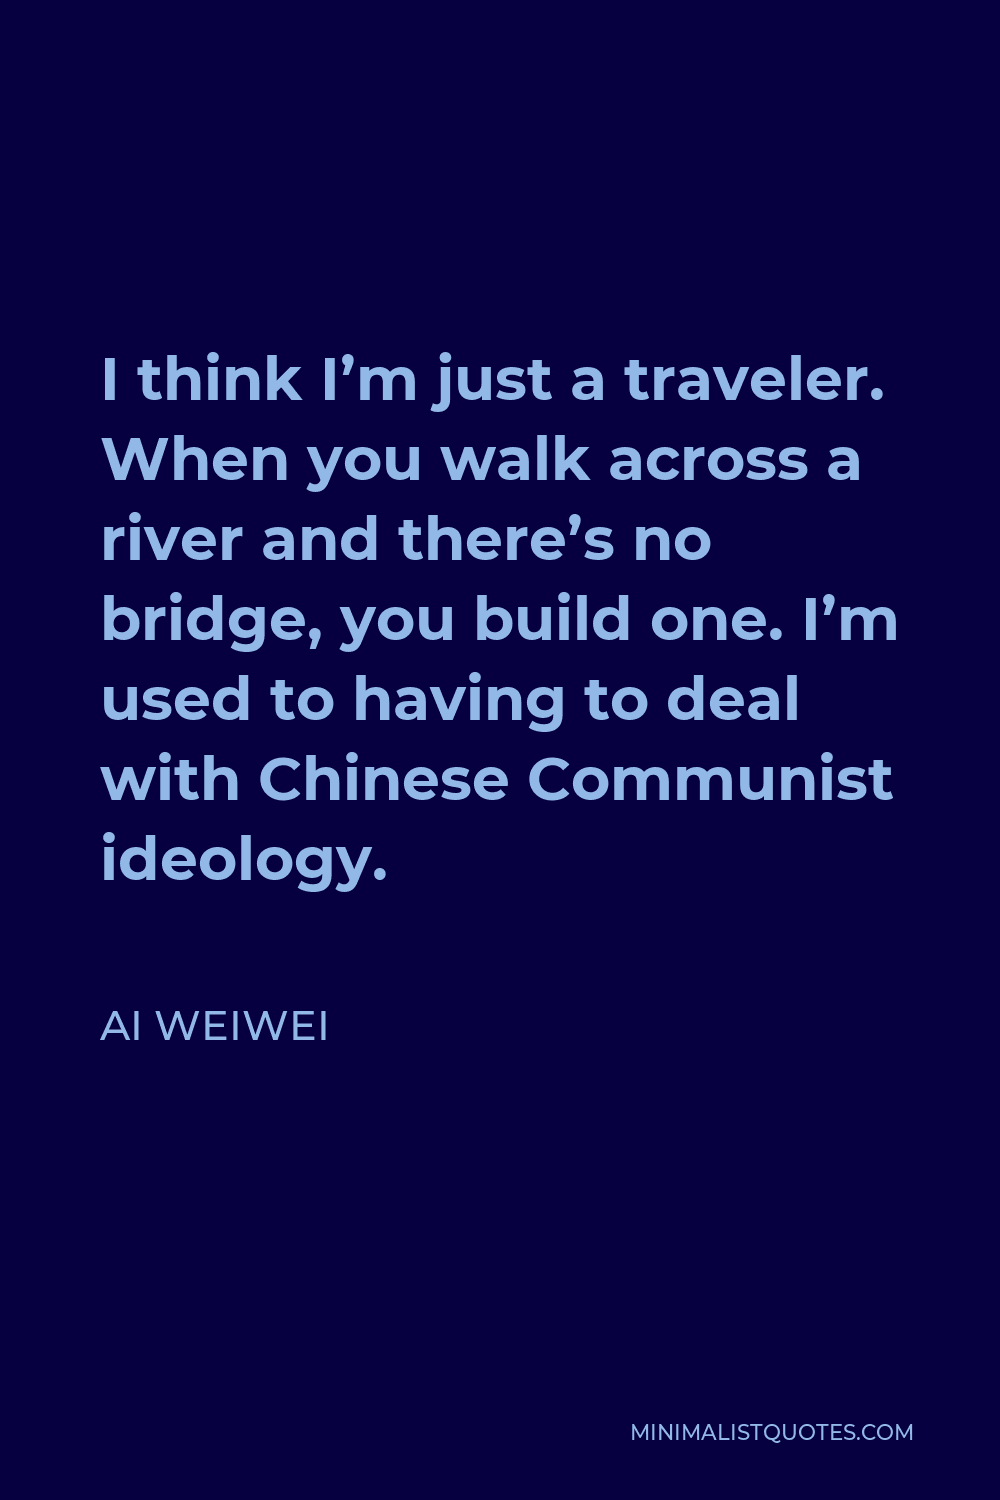 Ai Weiwei Quote - I think I’m just a traveler. When you walk across a river and there’s no bridge, you build one. I’m used to having to deal with Chinese Communist ideology.